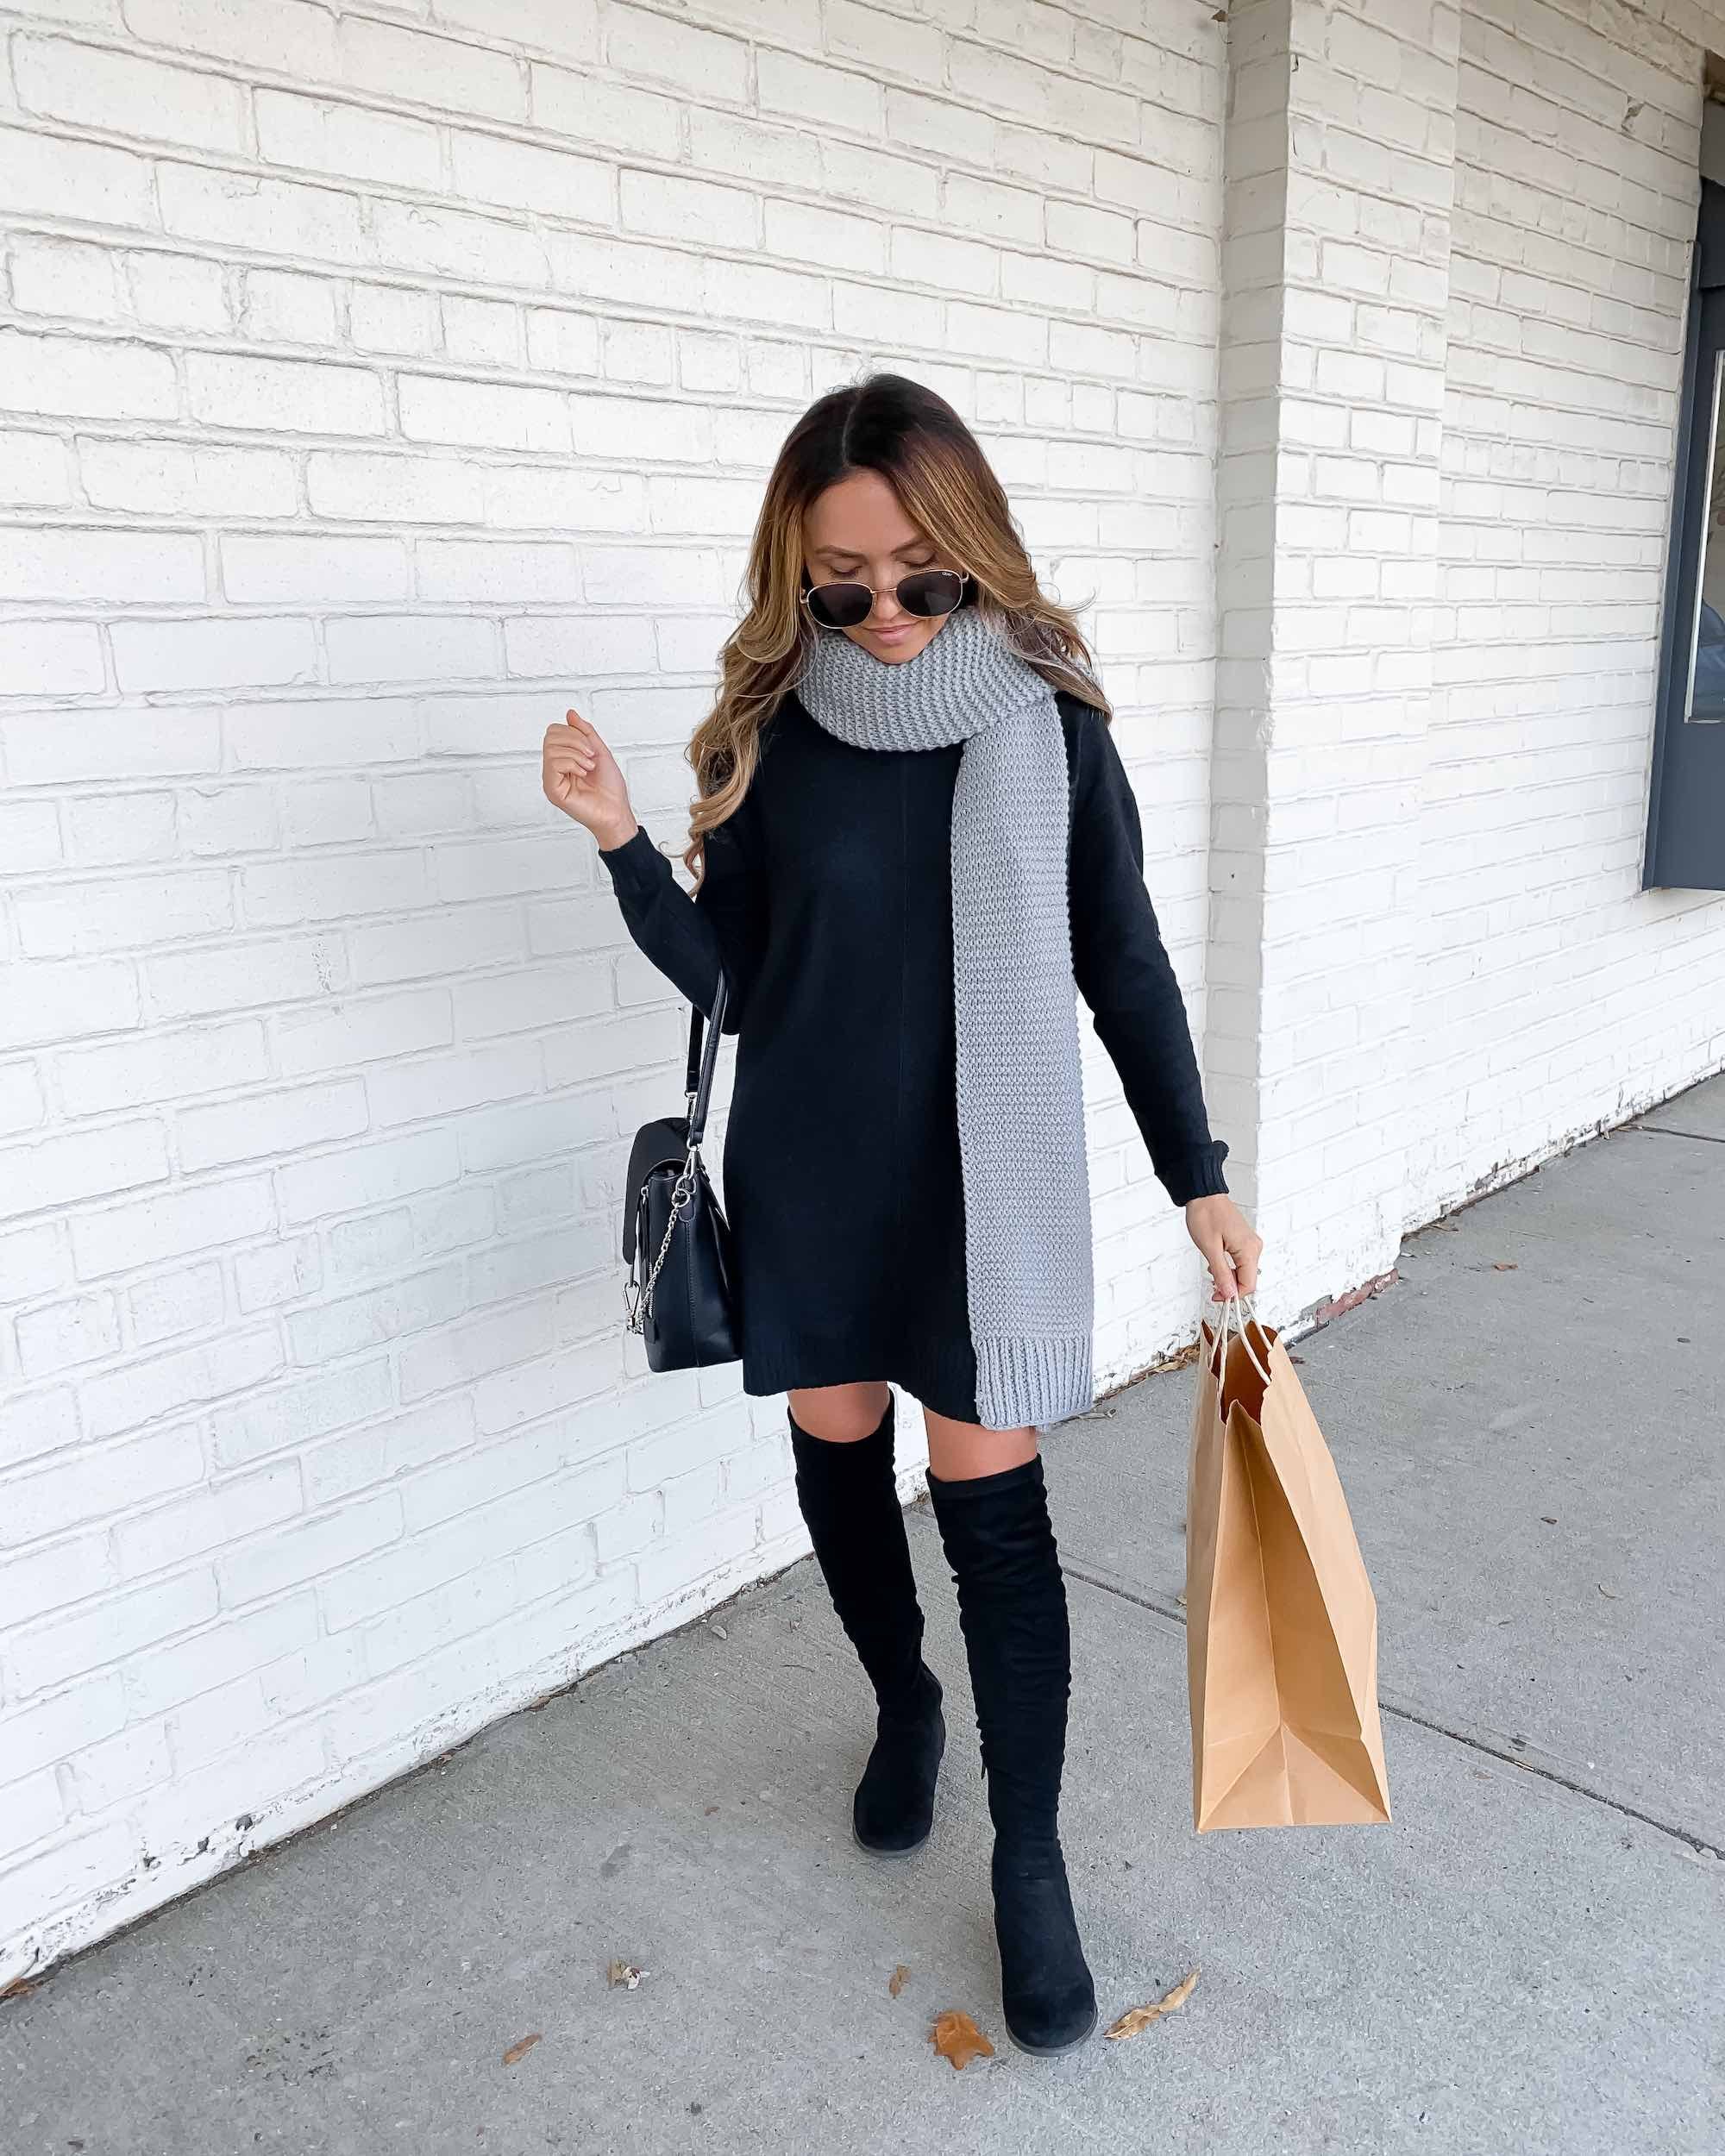 Cute And Cozy Sweater Dresses For Winter — Neutrally Nicole